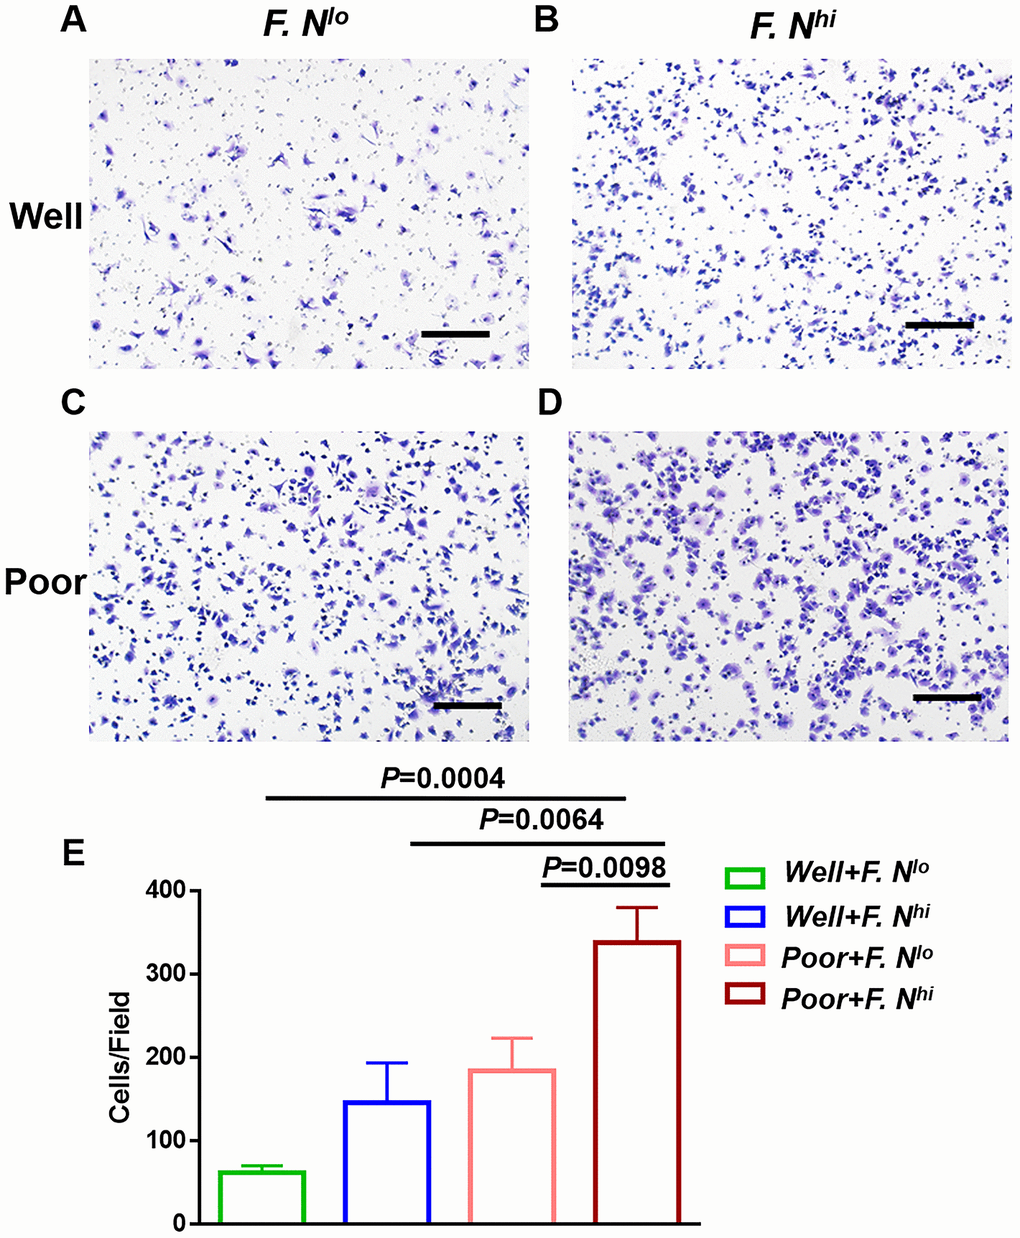 High levels of intratumoral F. nucleatum are associated with cancer cells invasion capacity. Representative Matrigel transwell for cells sorted for well differentiation and low (A) or high (B) amounts of F. nucleatum, or poor differentiation and low (C) or high (D) levels of intra-tumor F. nucleatum. (E) Statistical analyses of invasion cells for these groups. Scale bar = 500μm. Data are expressed as mean±SD (bars). All experiments were performed in triplicate.